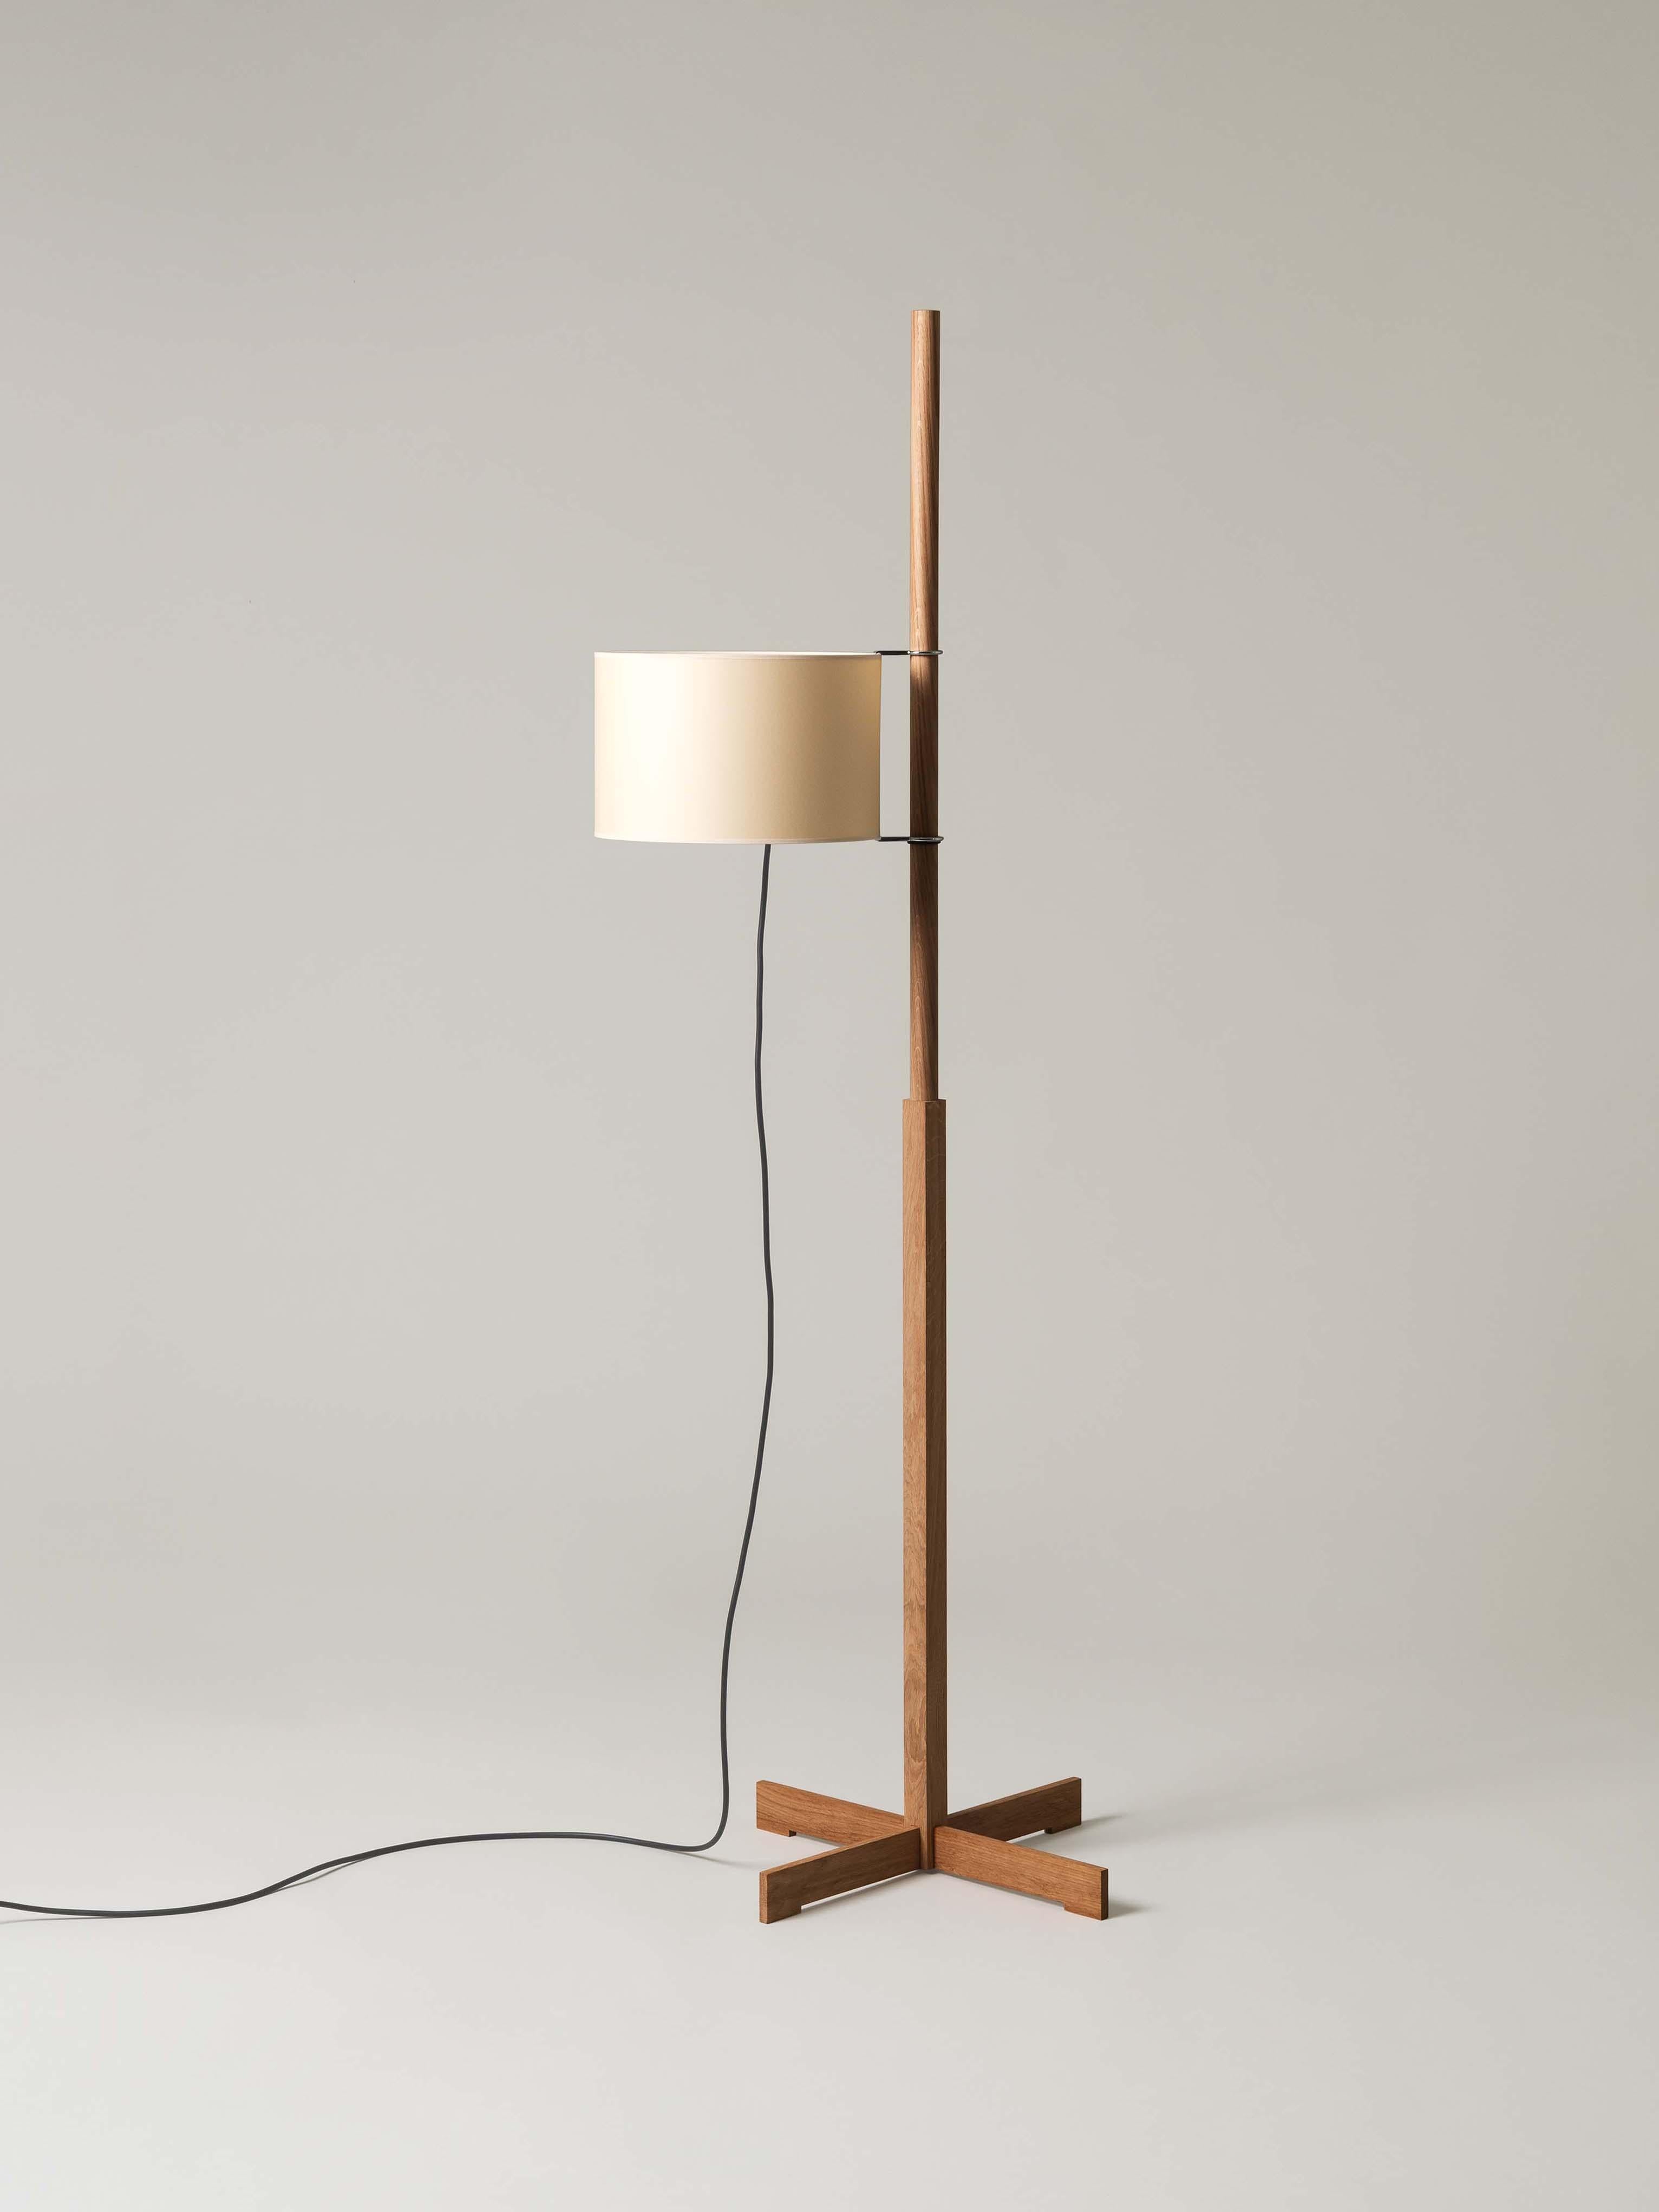 Beige and oak TMM floor lamp by Miguel Milá
Dimensions: D 50 x W 60 x H 166 cm
Materials: Cherry wood, parchment lampshade.
Available in 3 lampshades: beige, white and white with diffuser.
Available in 5 woods: beech, cherry, walnut, natural oak